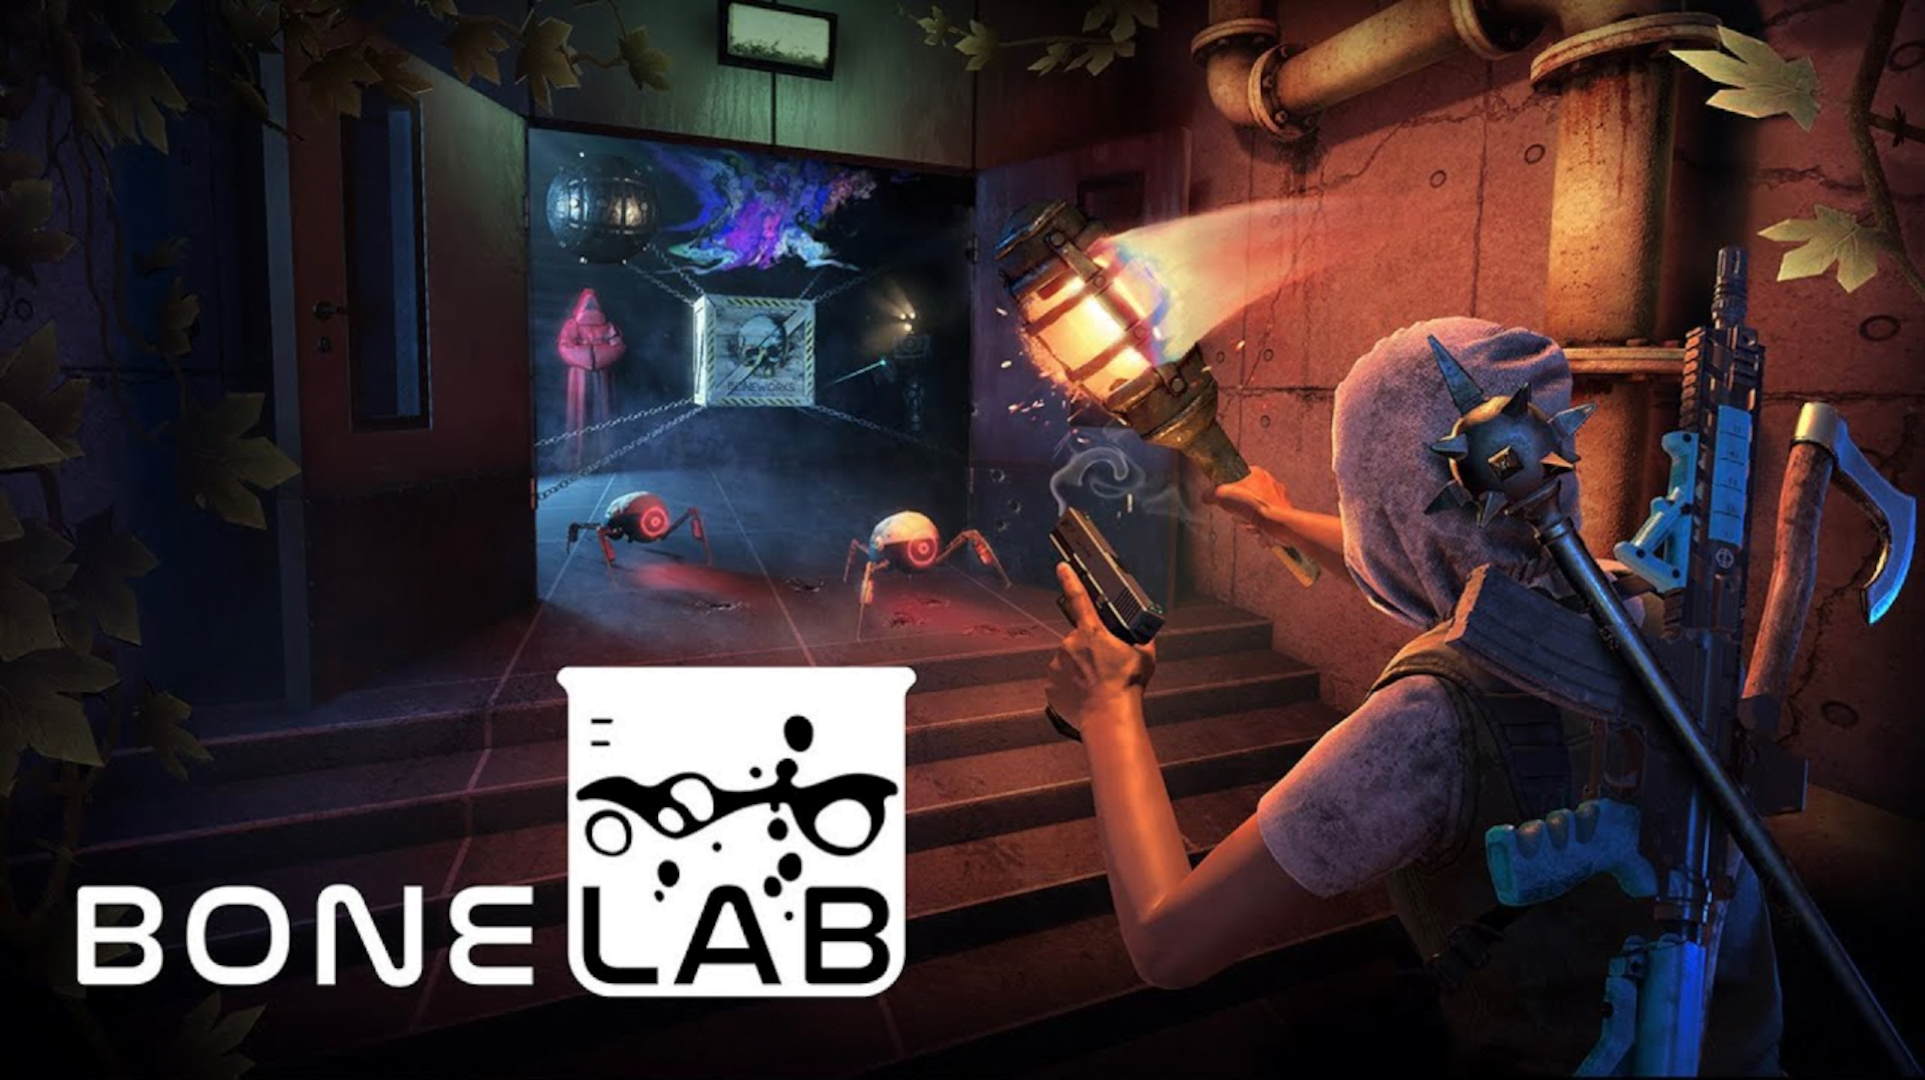 Bonelab review: VR shooter hit or failed experiment?